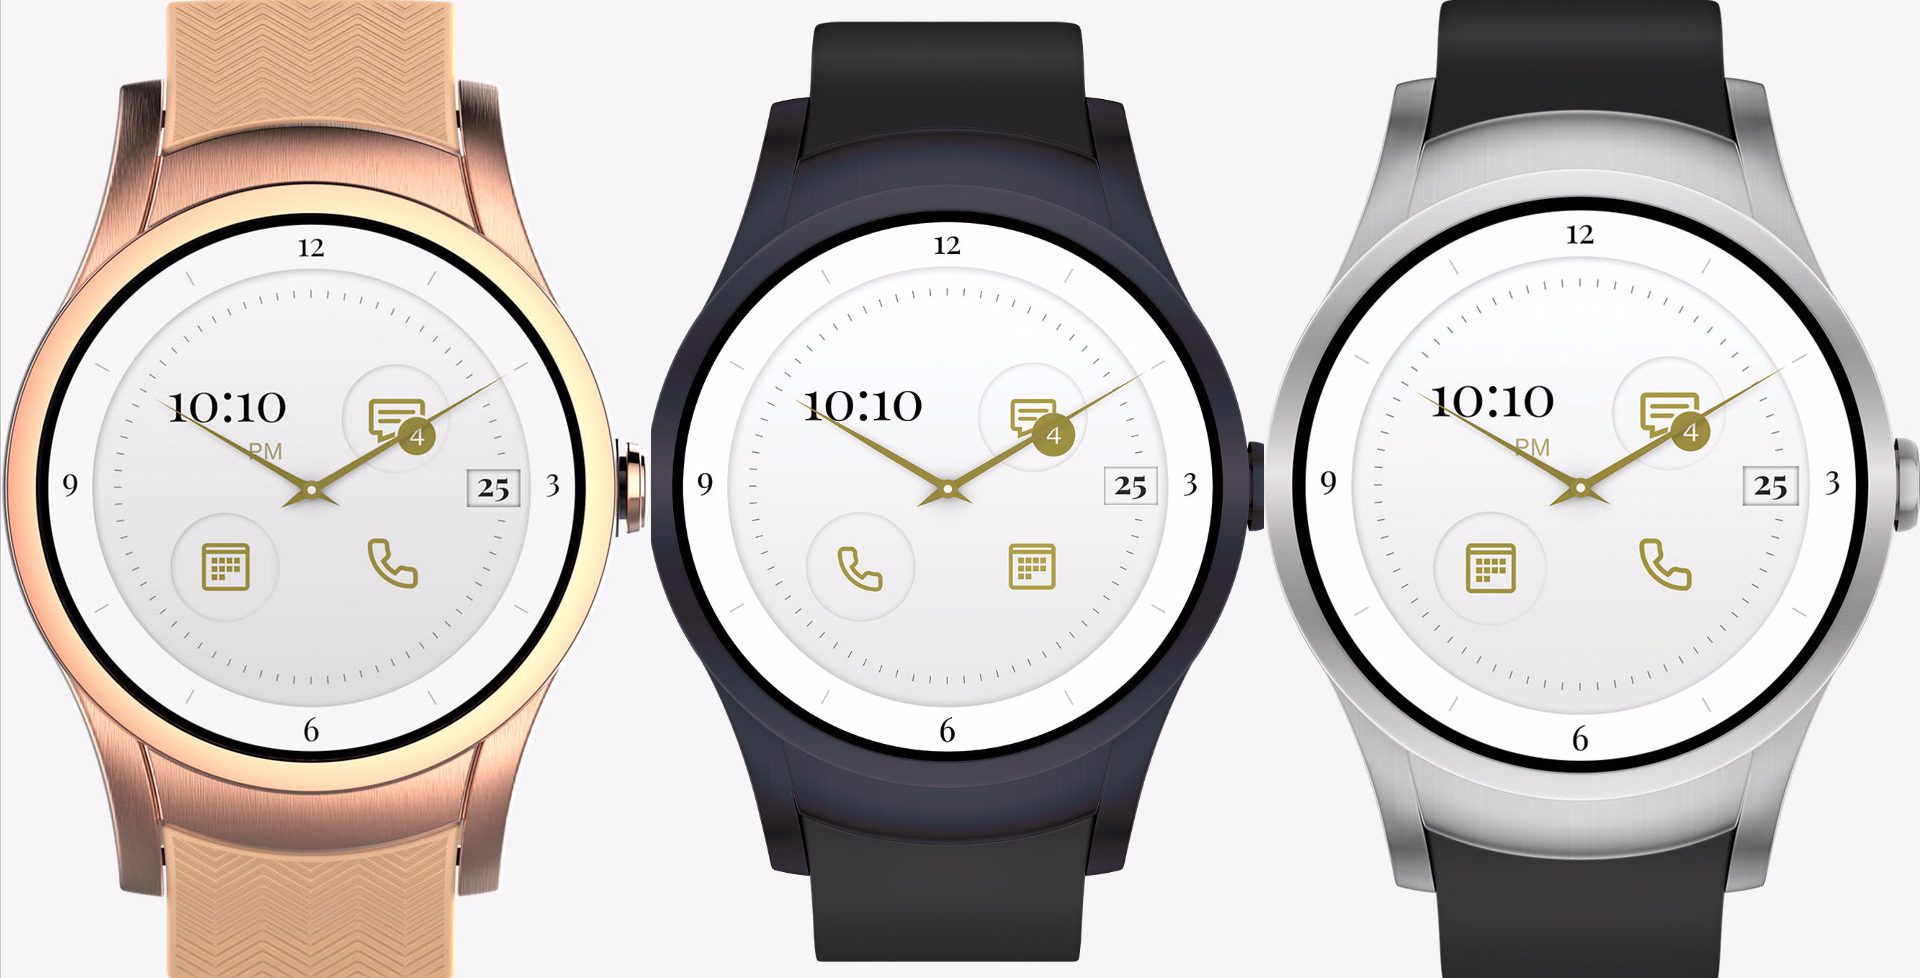 The Wear24 smartwatch drops in 24 days and will be exclusive to Verizon